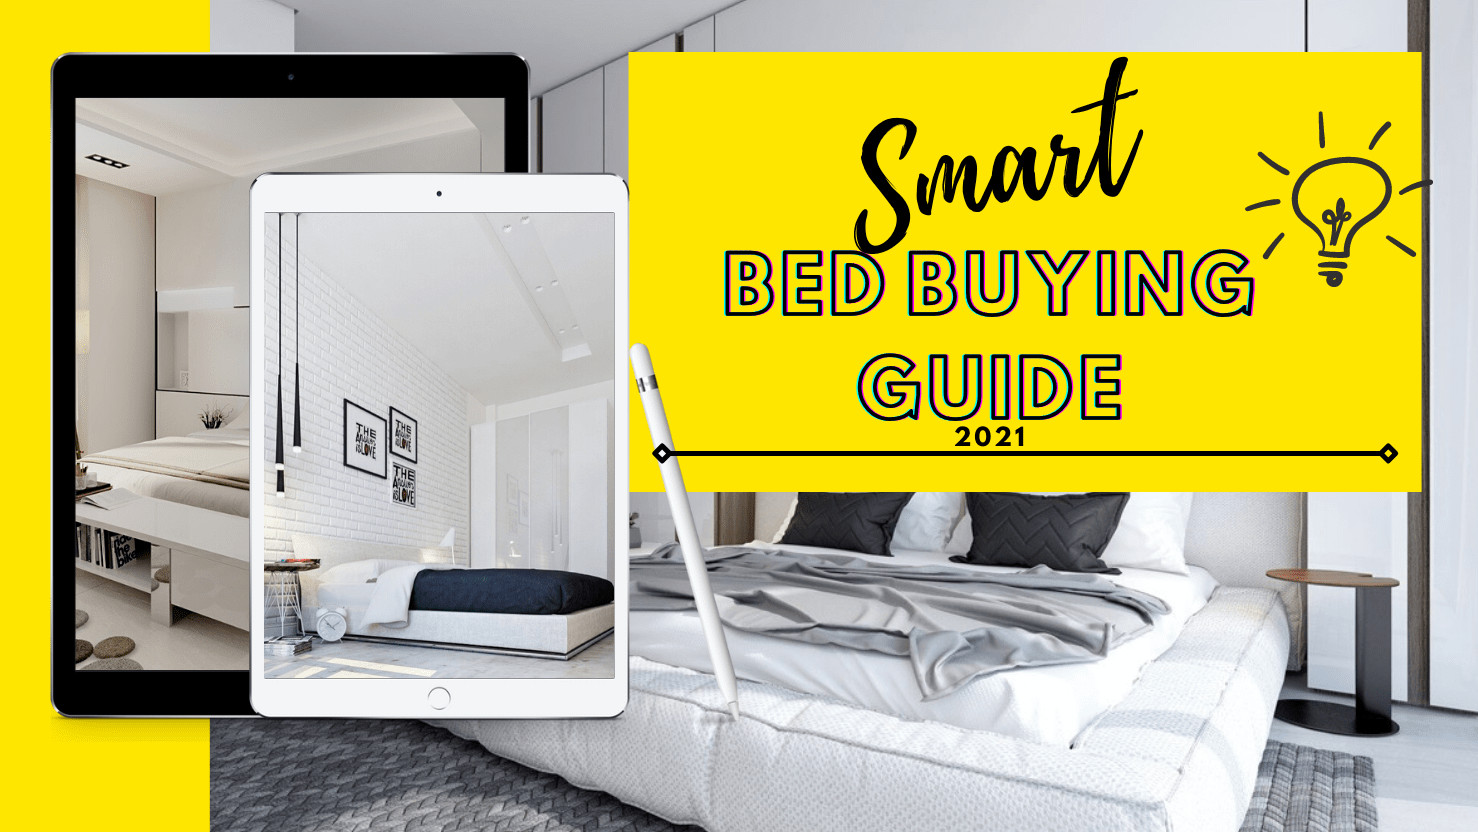 Beds: Smart Buying Tips